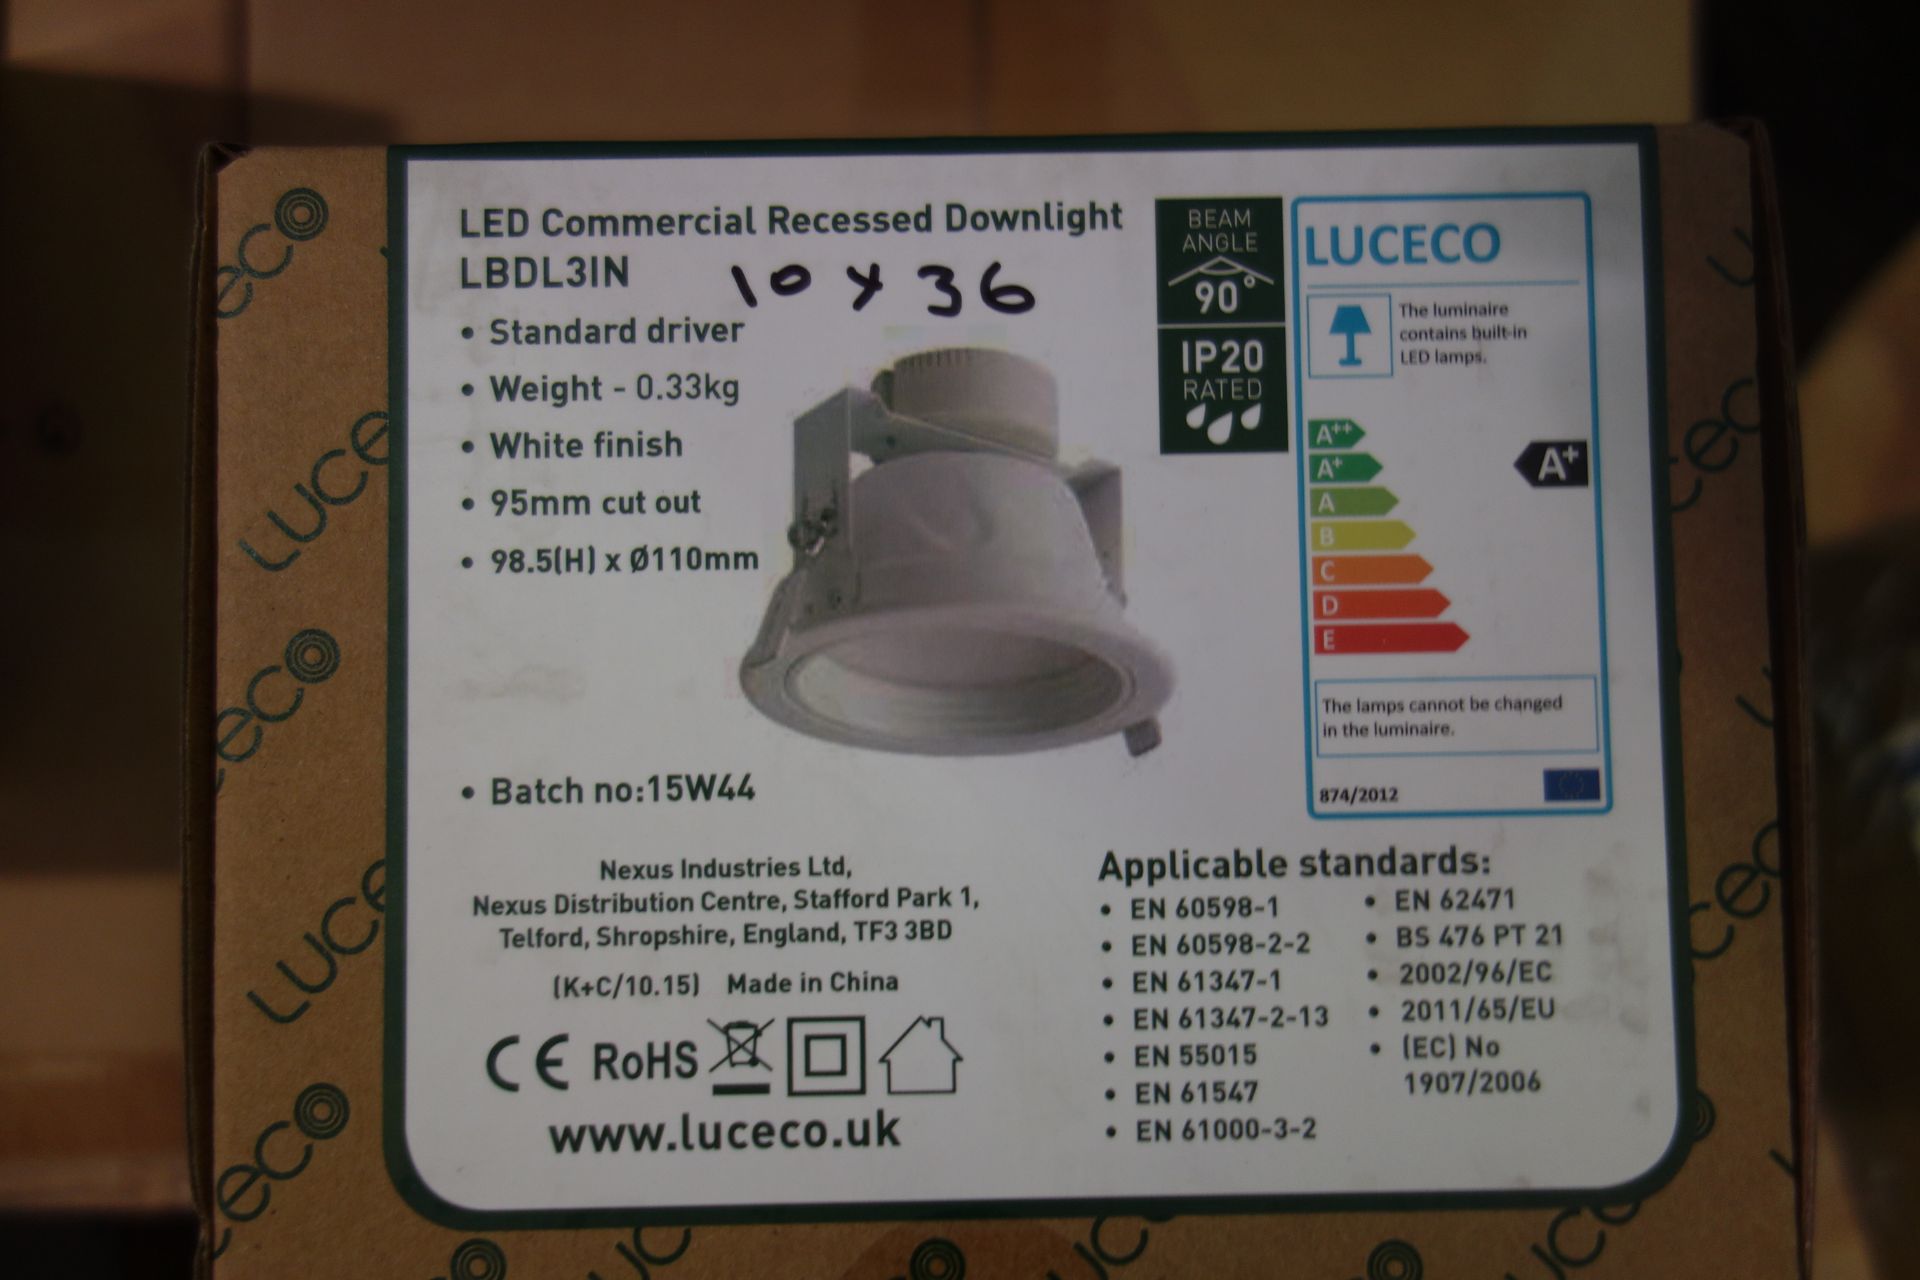 36 X Luceco LBDL3IN LED Commericial Recessed Downlights White Finish